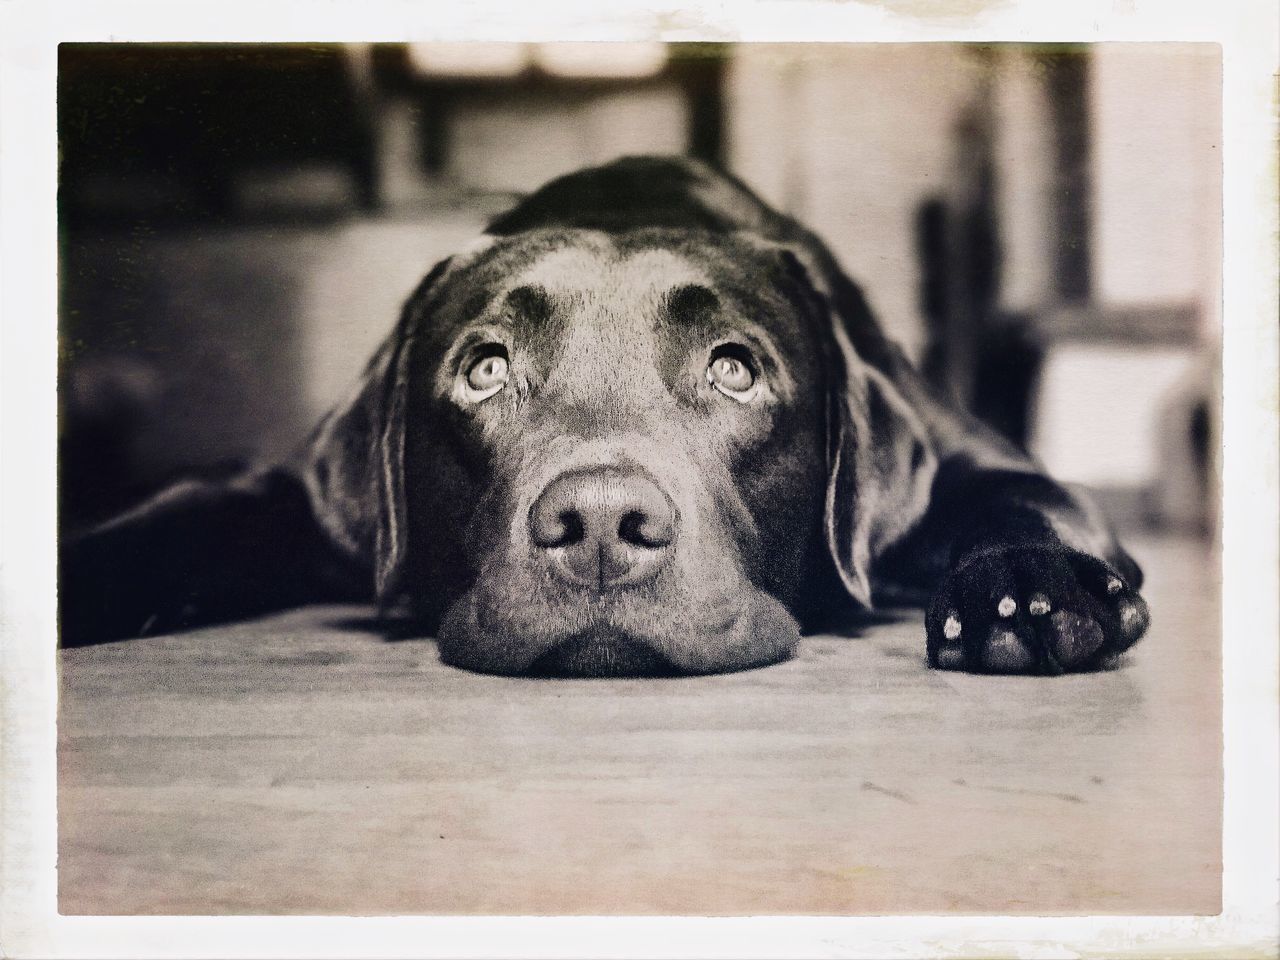 CLOSE-UP PORTRAIT OF A DOG ON FLOOR